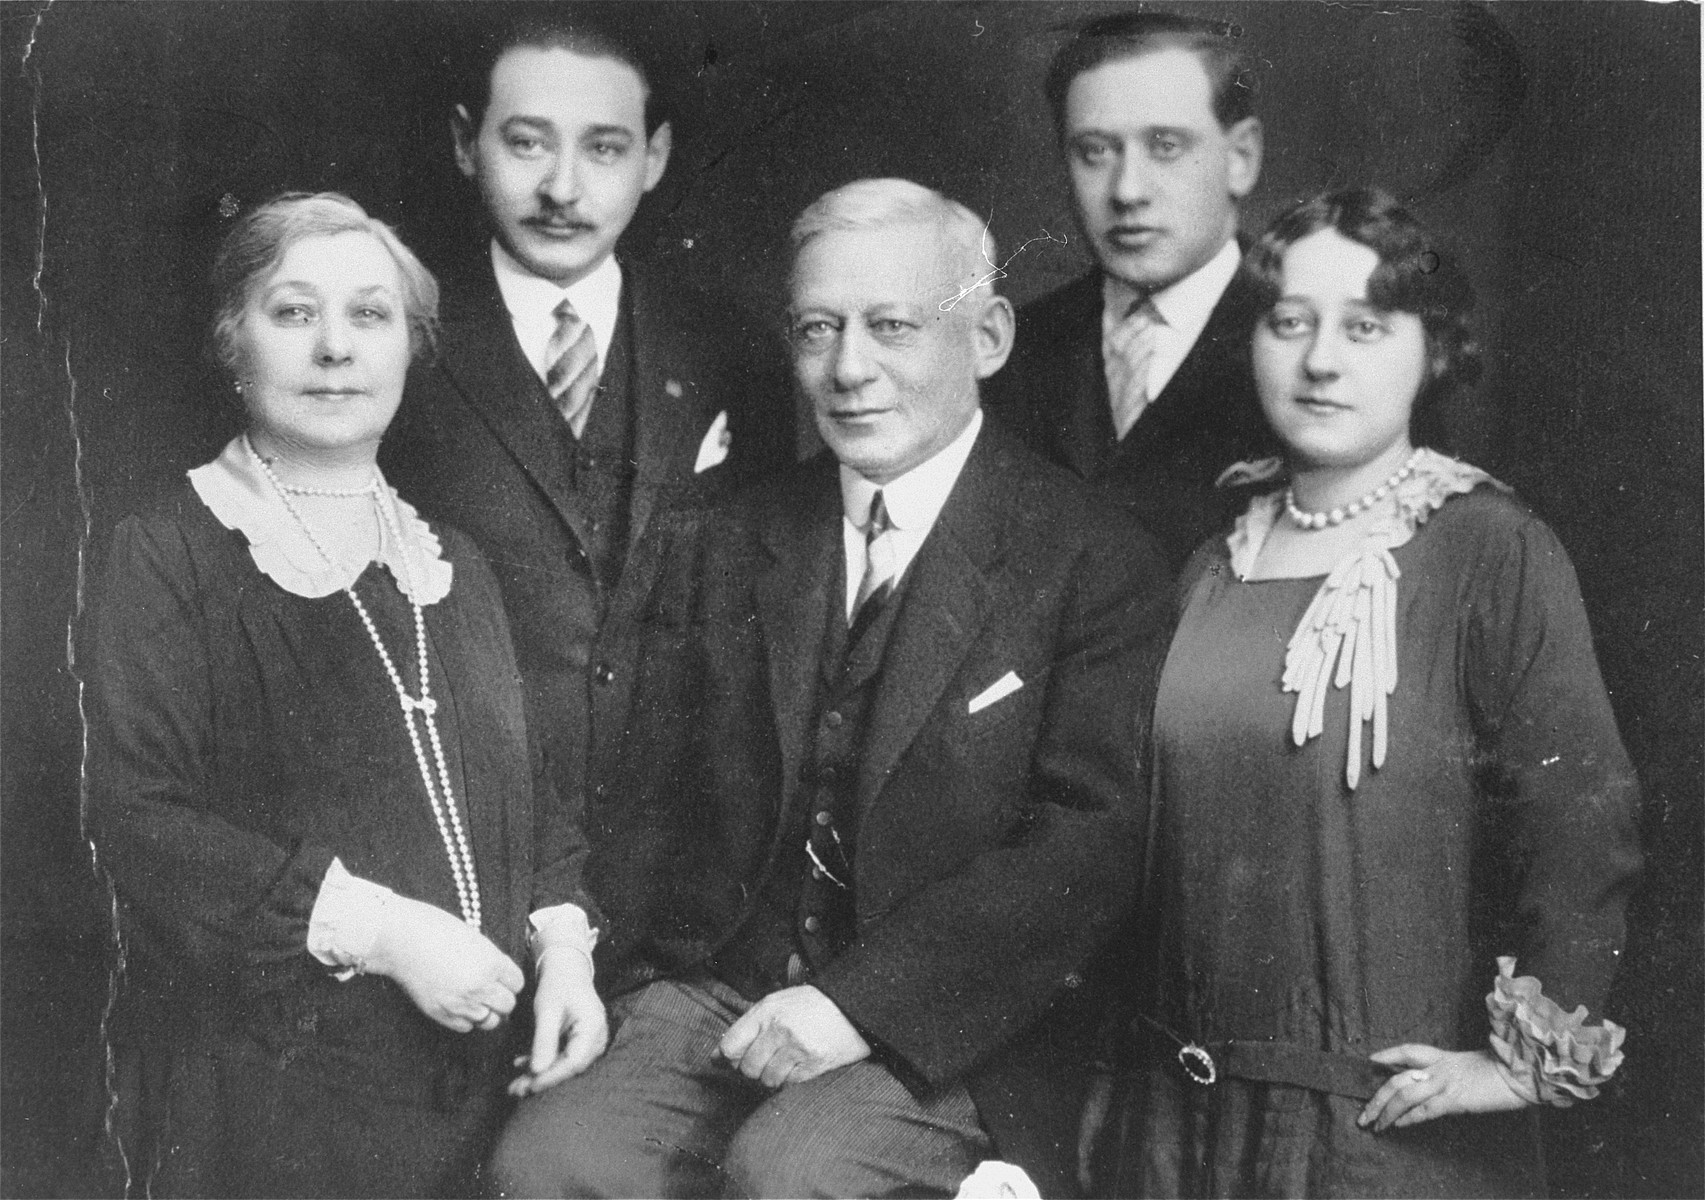 Portrait of Samu and Malvina Kornhauser with their three children, taken on the occasion of their twenty-fifth wedding anniversary.  

Pictured in the front row from left to right are: Malvina Kornhauser, Samu Kornhauser and Margit Kornhauser.  Behind them from left to right, are Laszlo Kornhauser and Karoly Kornhauser.